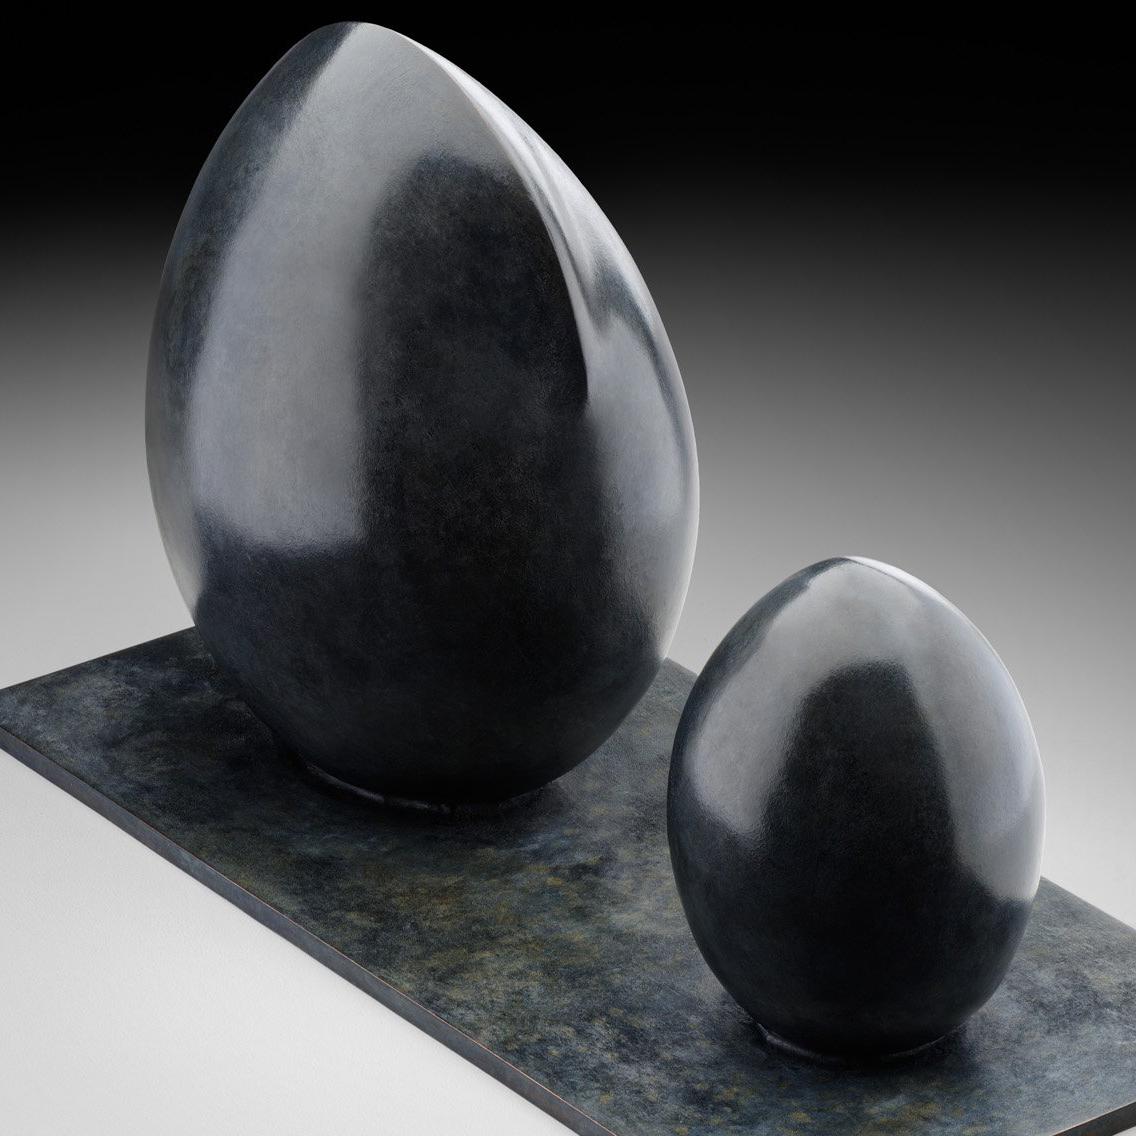 Genese is a 15.5 x 25 cm bronze abstract sculpture. It is part of a limited edition of 8. It shows two free standing egg shaped elements. 

Self-taught through her patient work on clay, which she has been sculpting for more than twenty years,